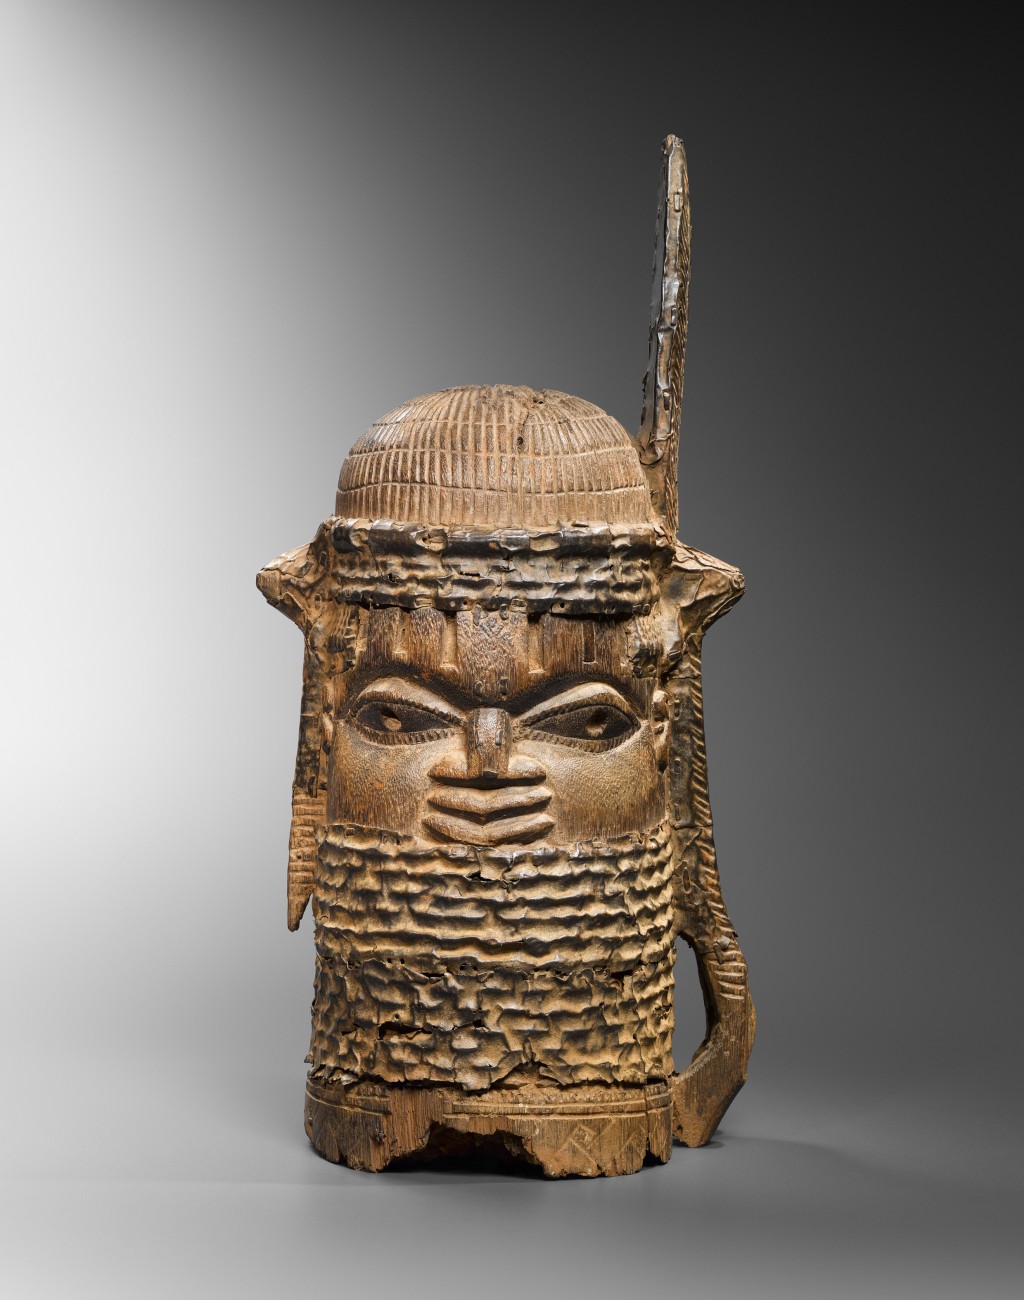 Benin head, Nigeria
Wood and metal - height 54 cm
Provenance: Old European Collection